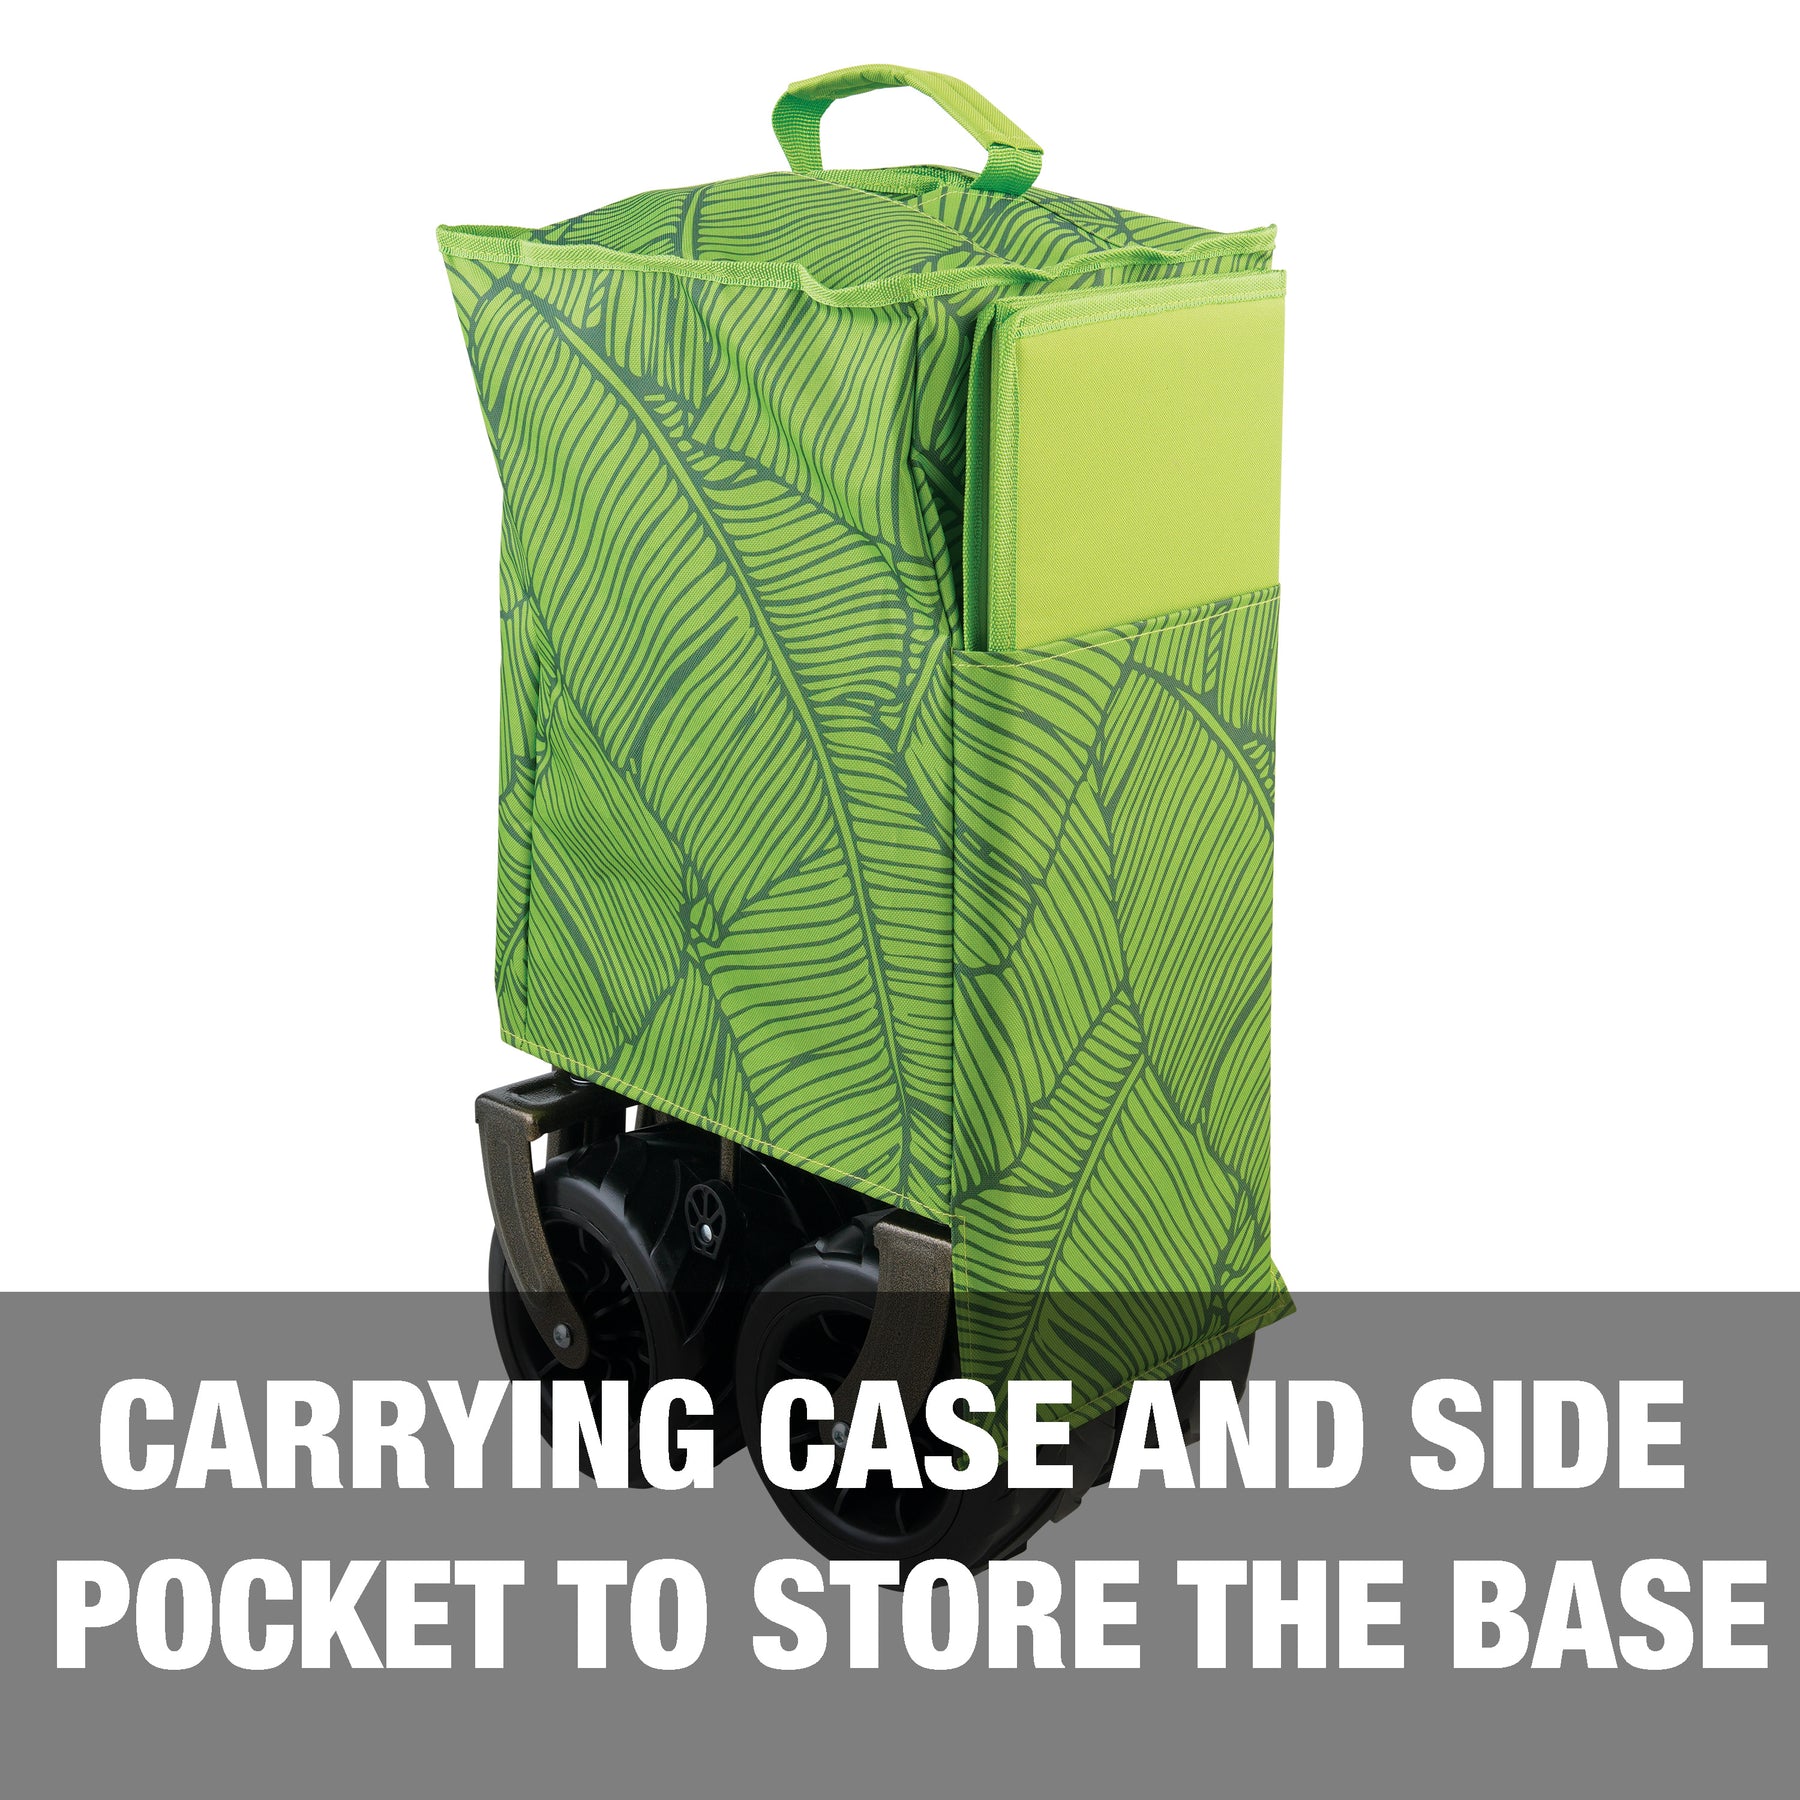 Comes with a carrying case and side pocket to store the base.